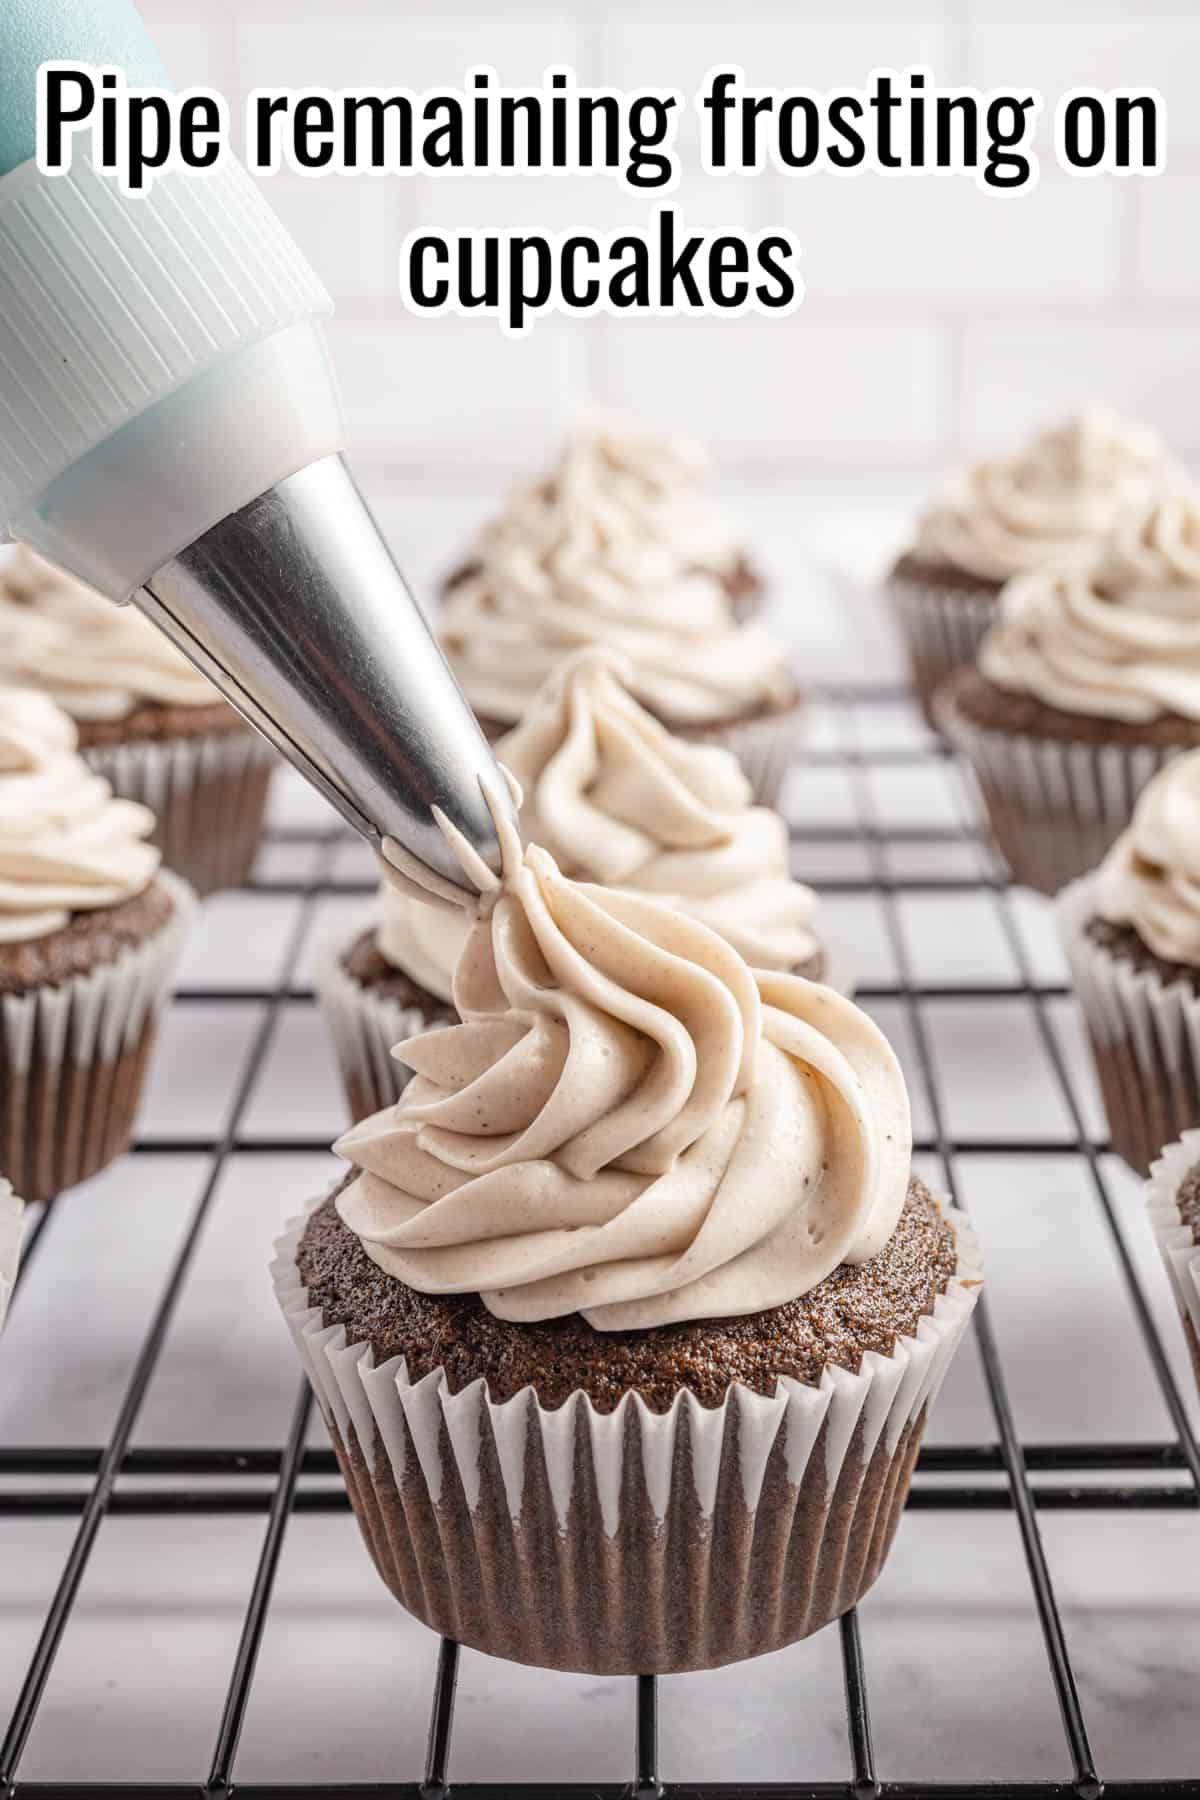 oreo cupcake being piped with frosting with words "Pipe remaining frosting on cupcakes" overlaid in text.